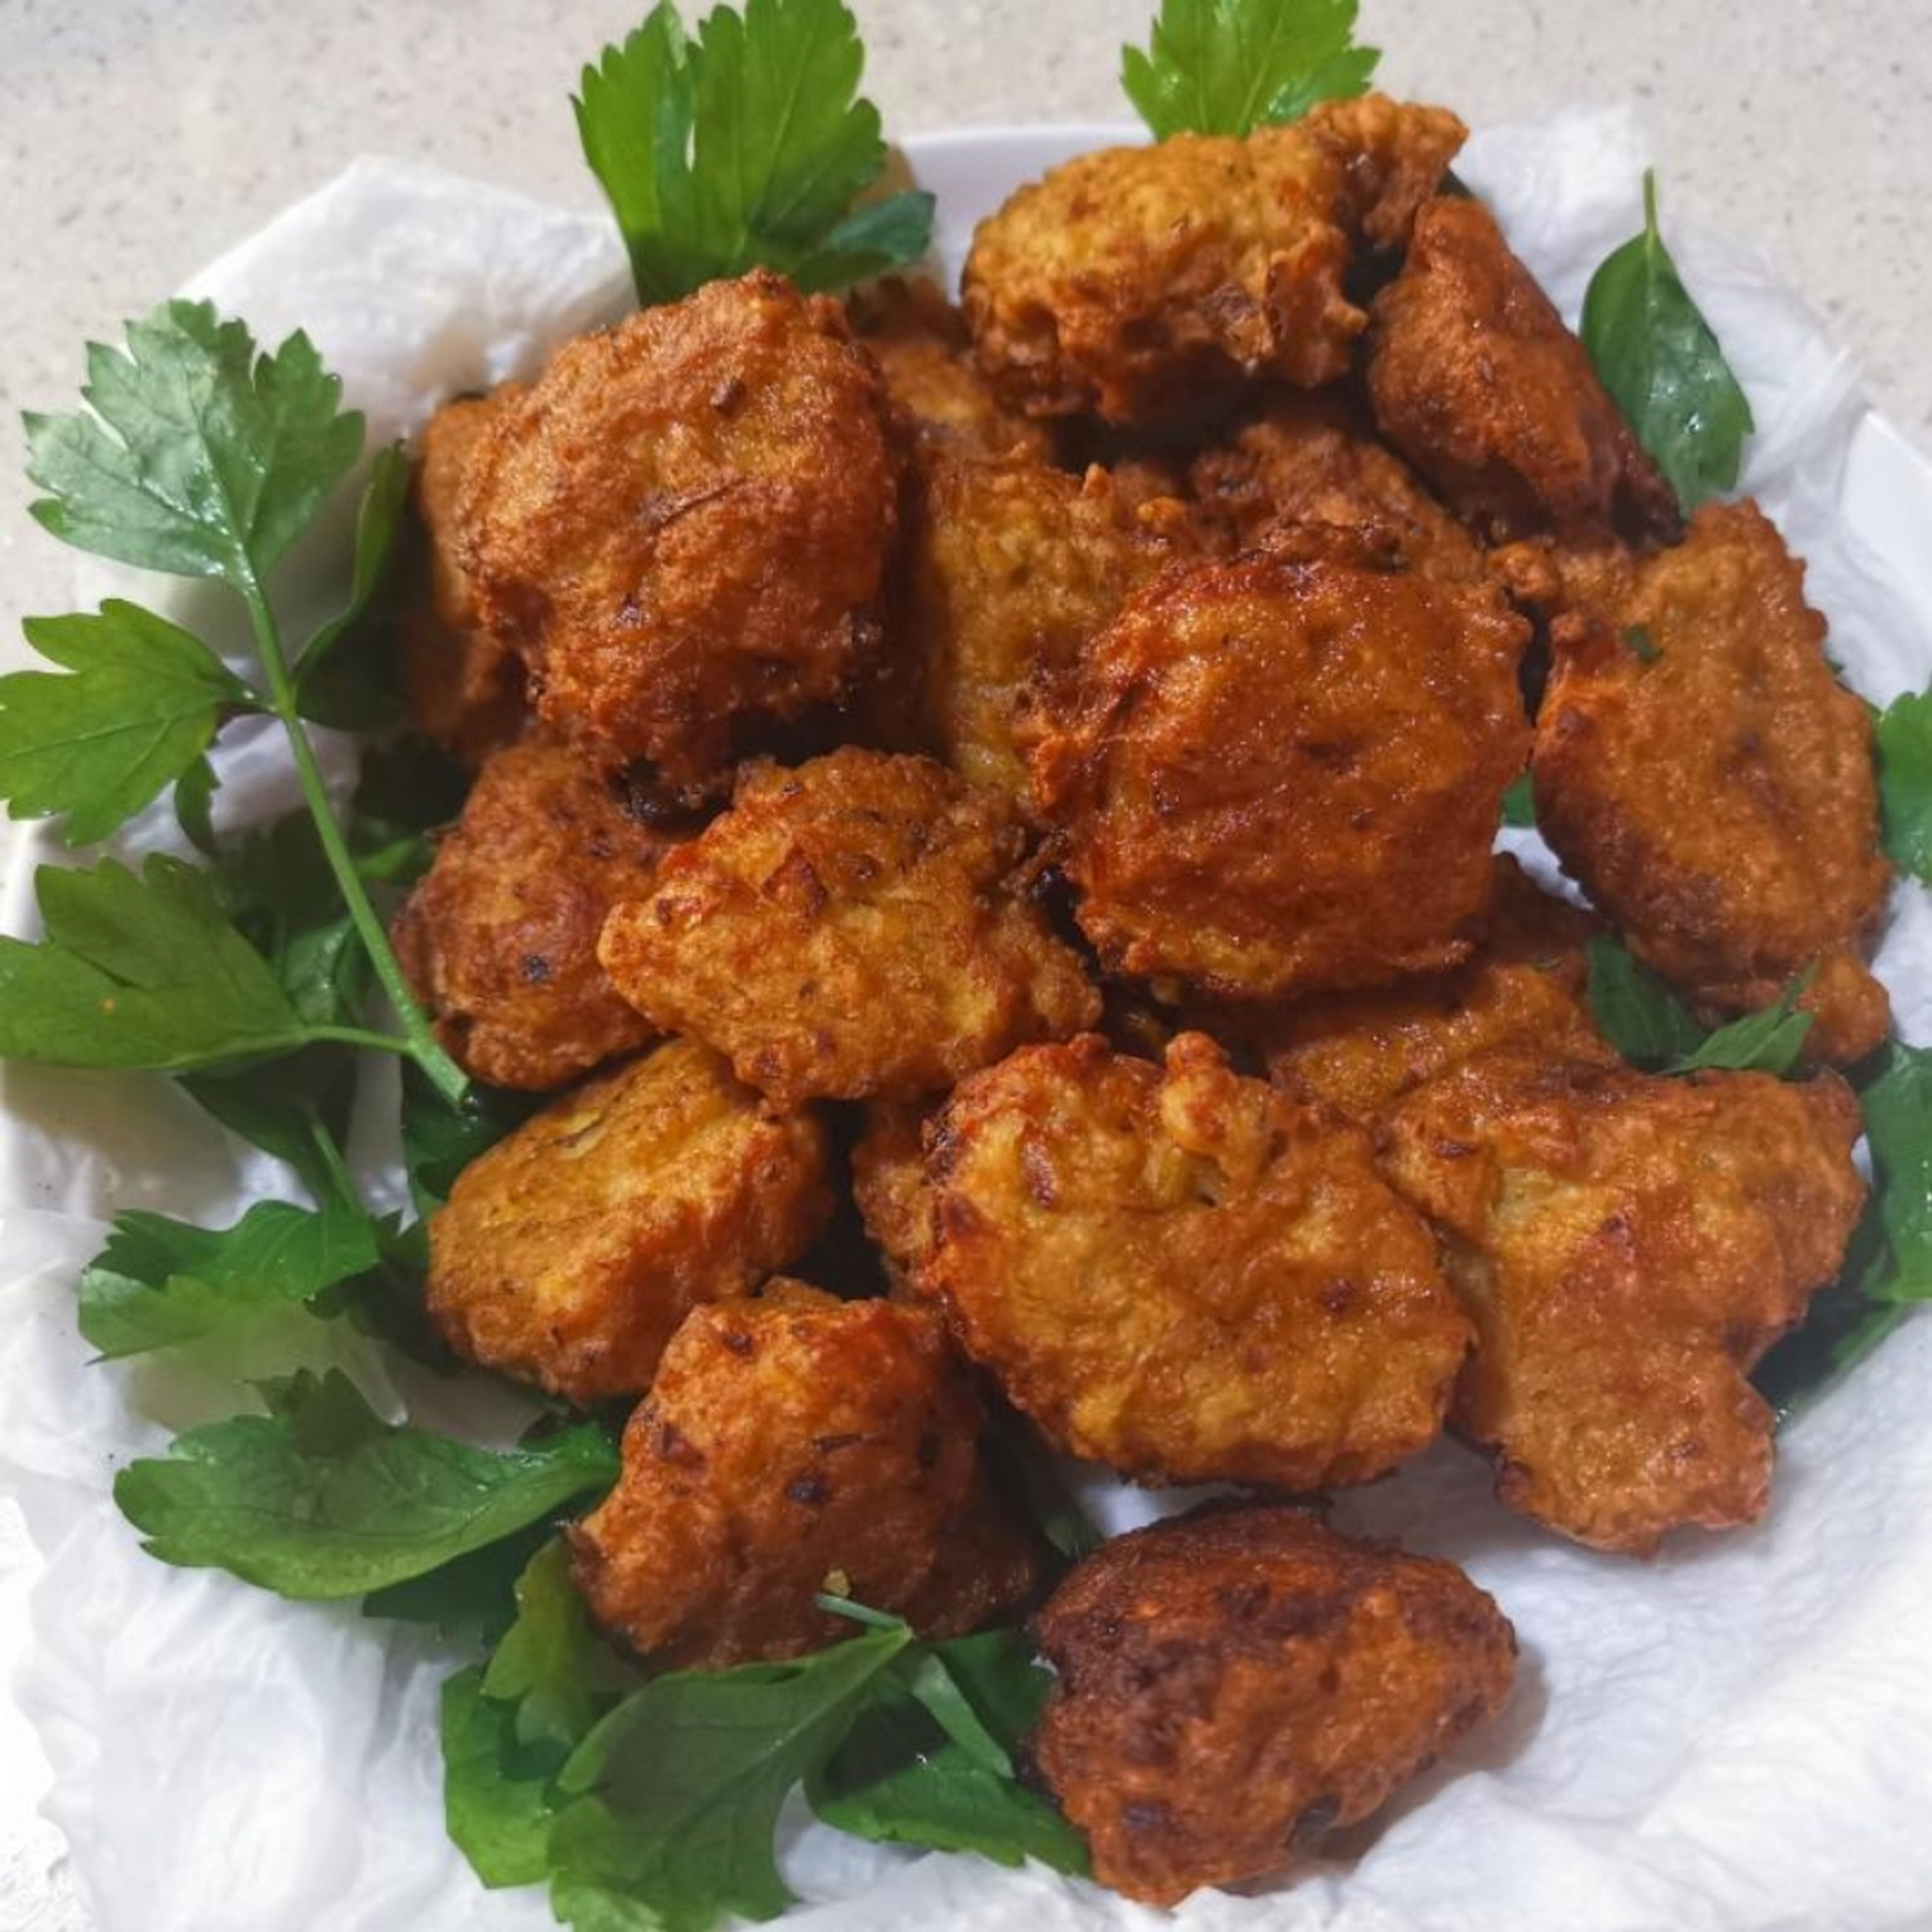 11. Garnish the fried meat ball. Ready to serve.